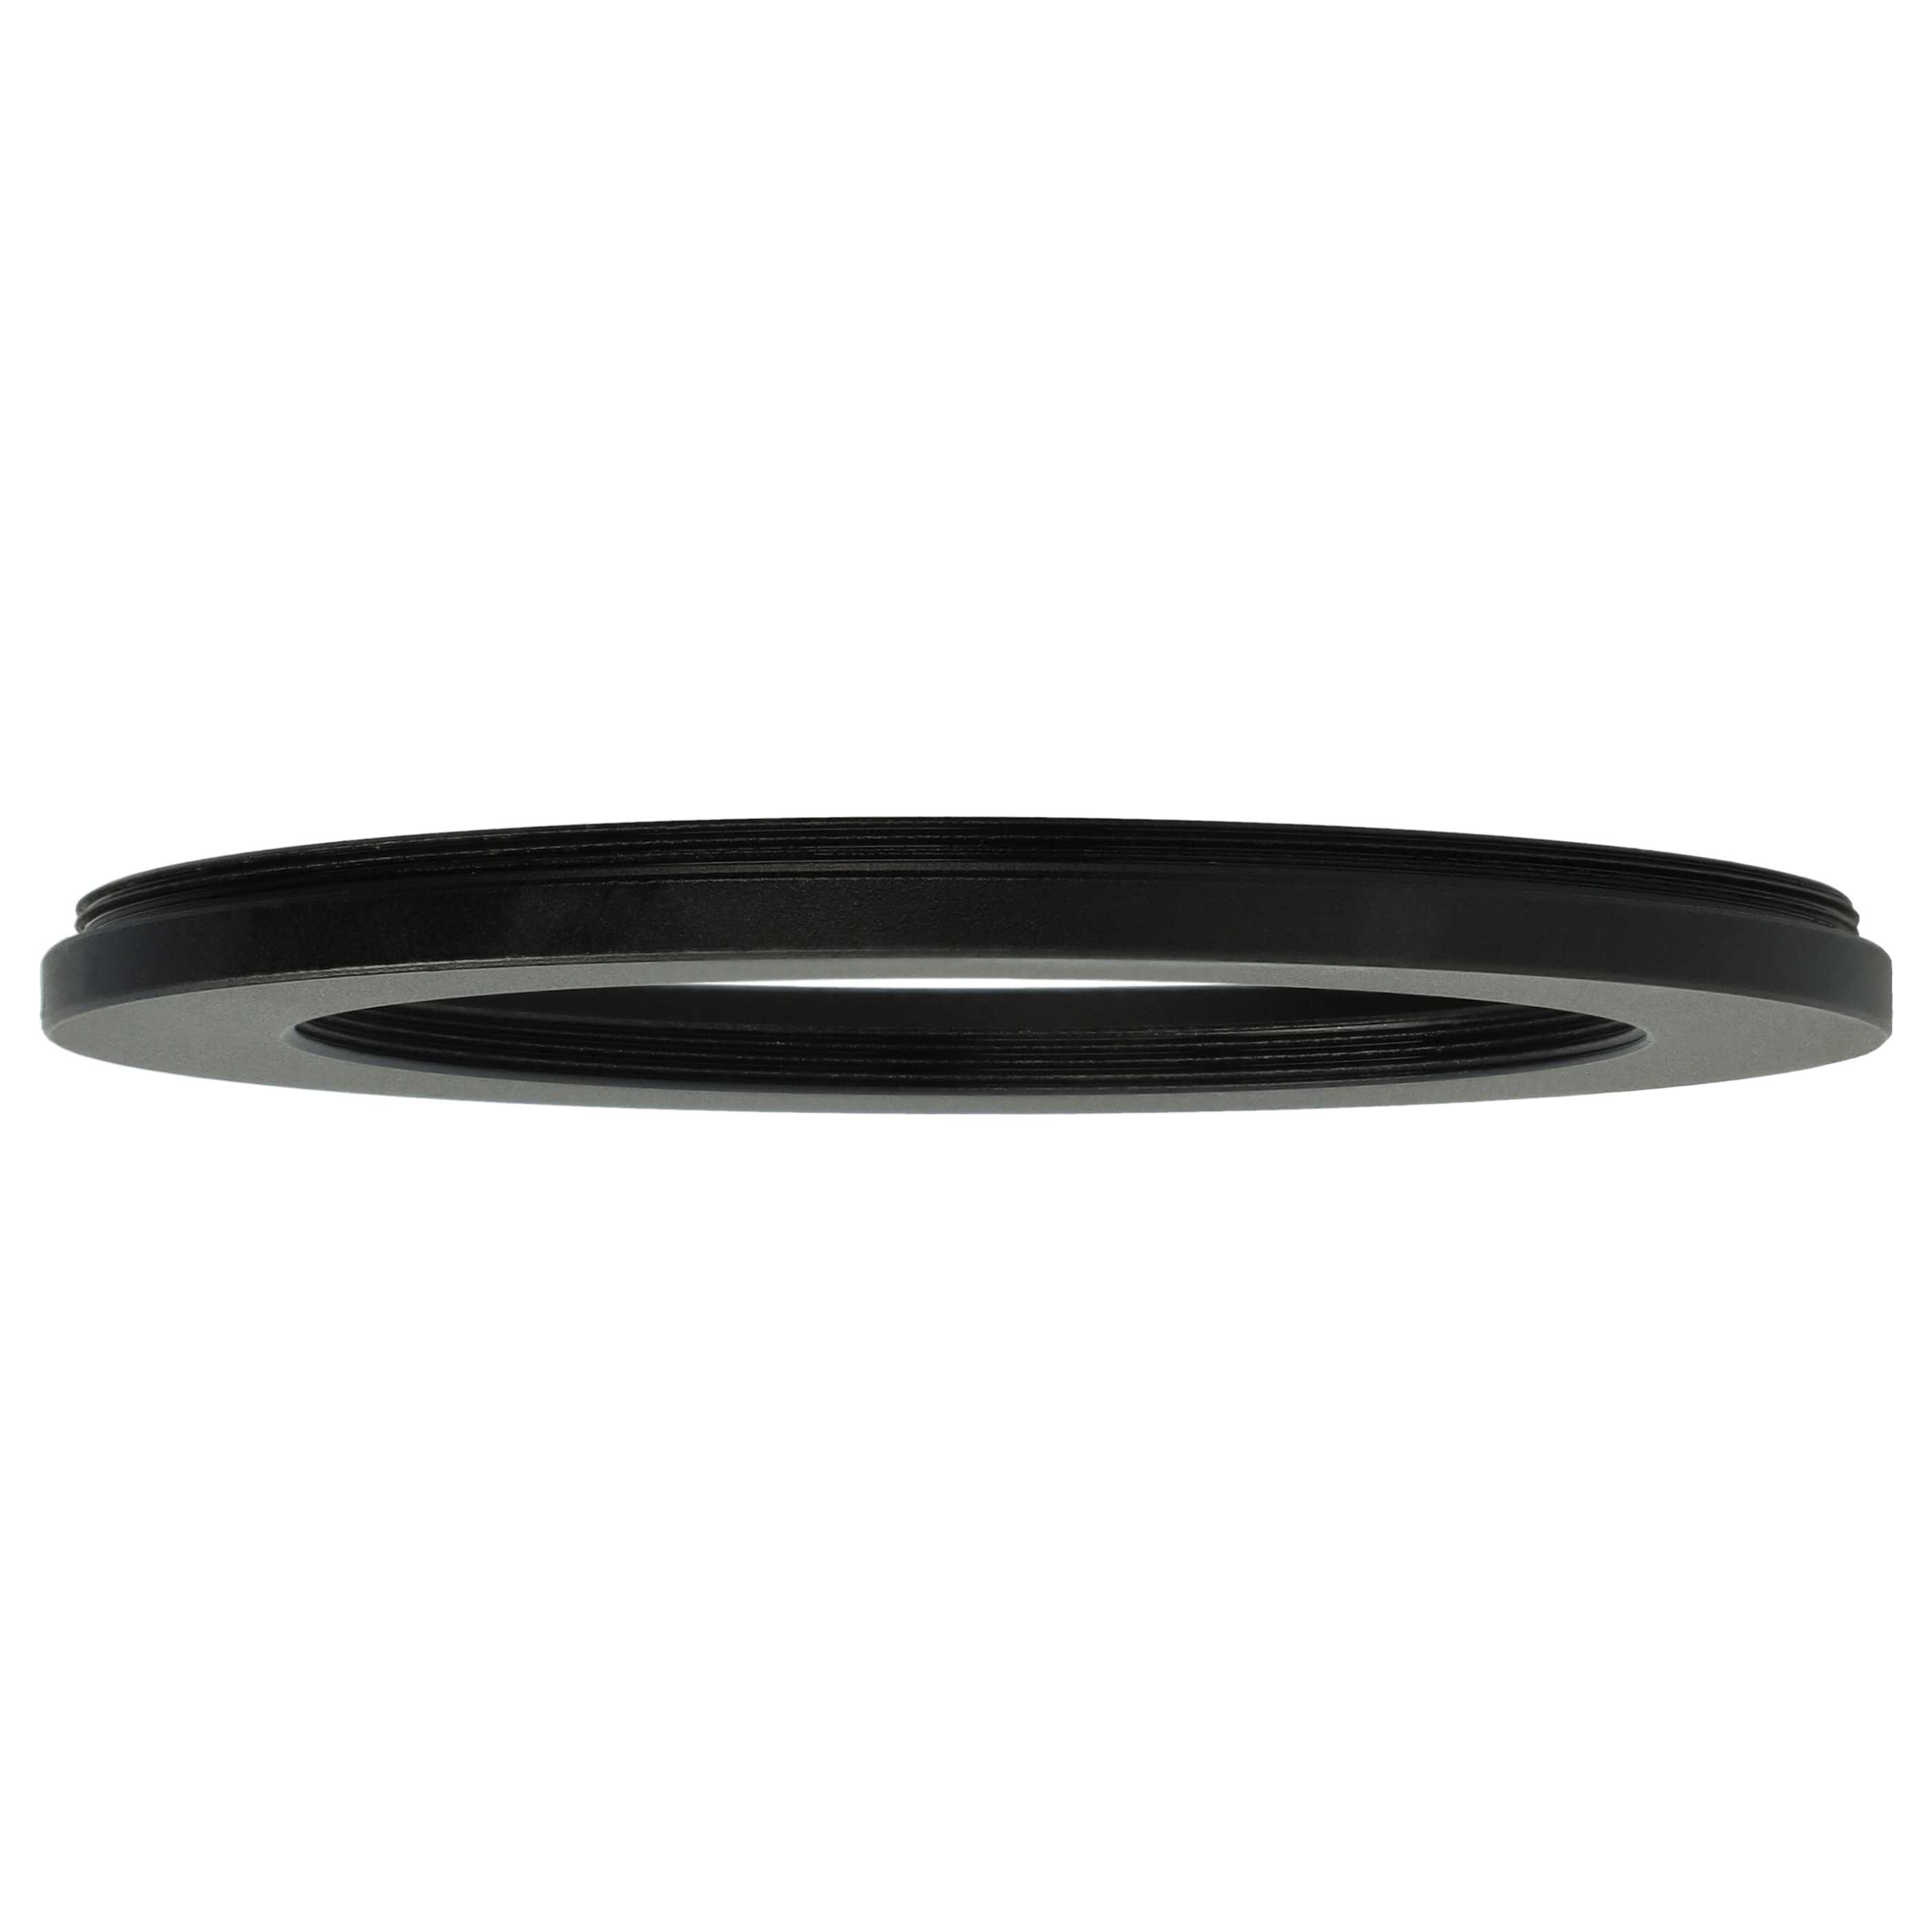 Step-Down Ring Adapter from 82 mm to 62 mm suitable for Camera Lens - Filter Adapter, metal